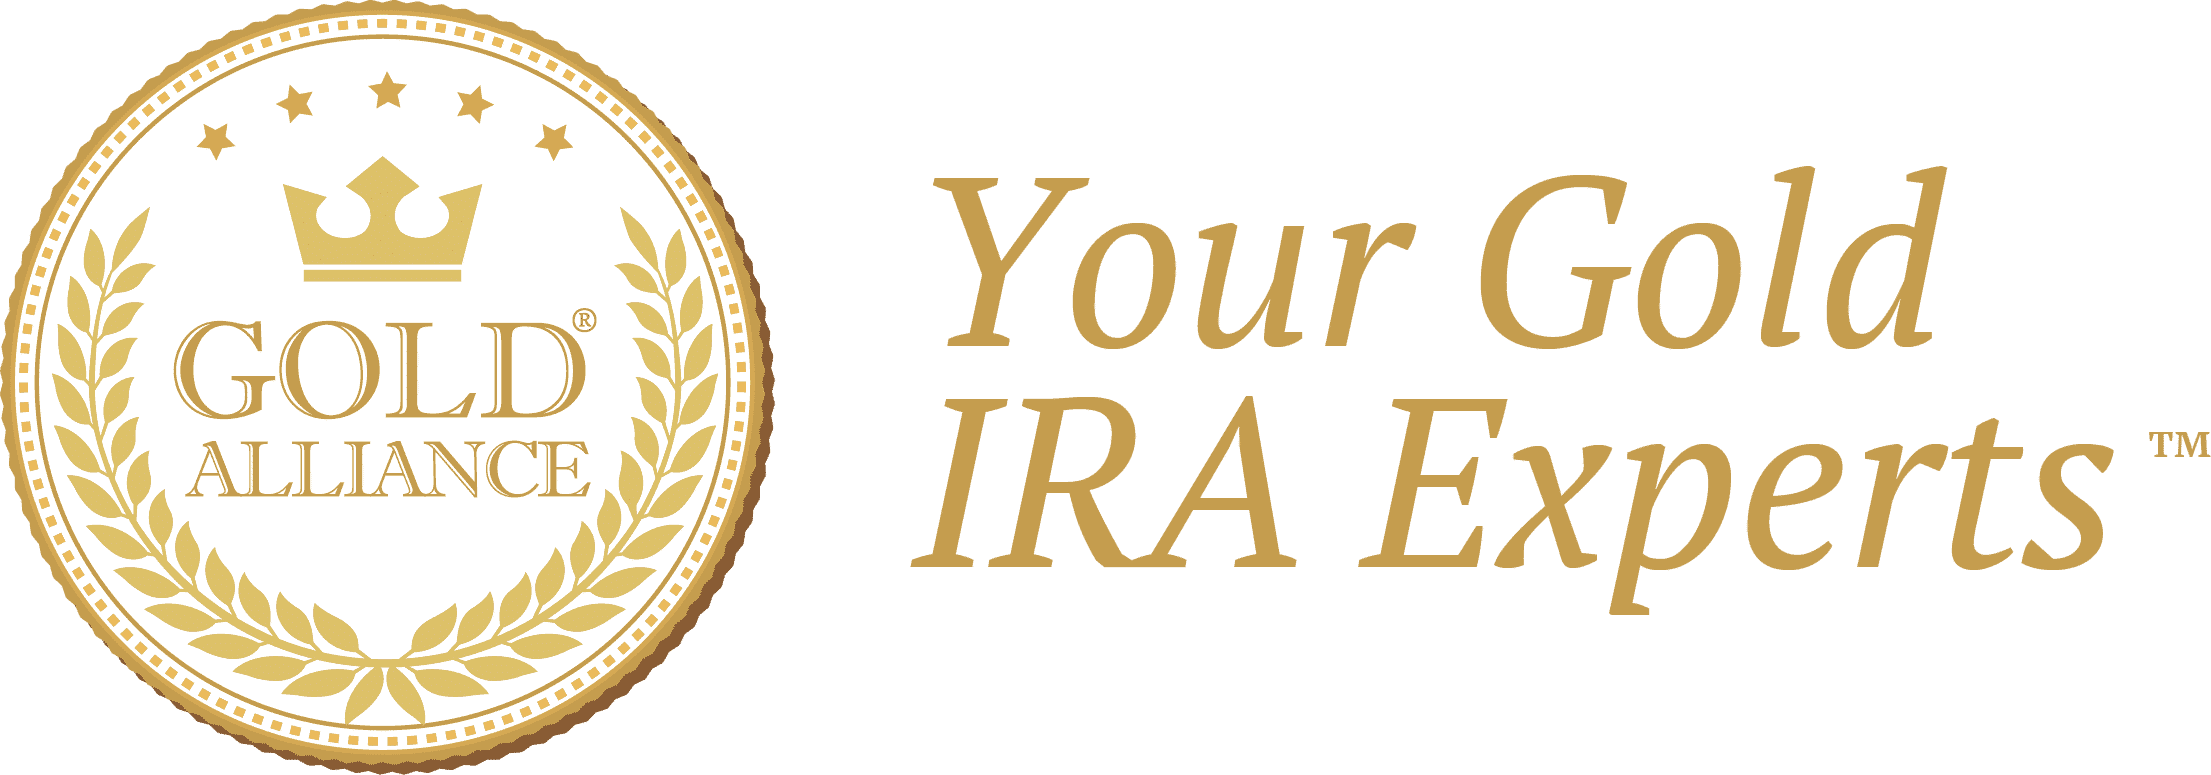 gold alliance logo with your gold ira experts